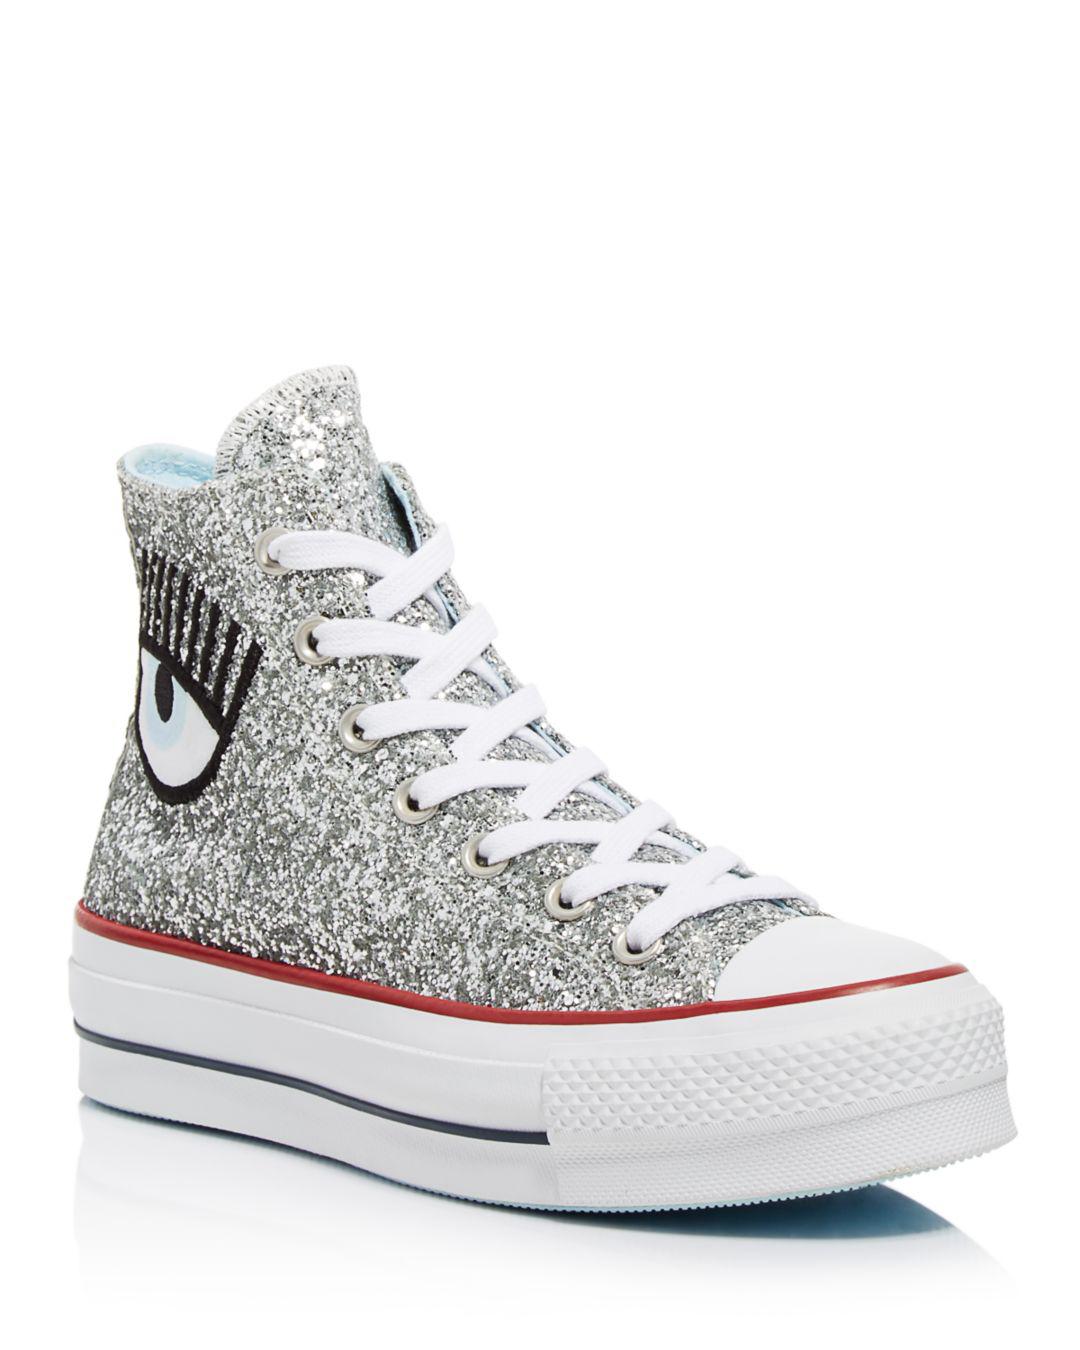 silver sparkly high tops